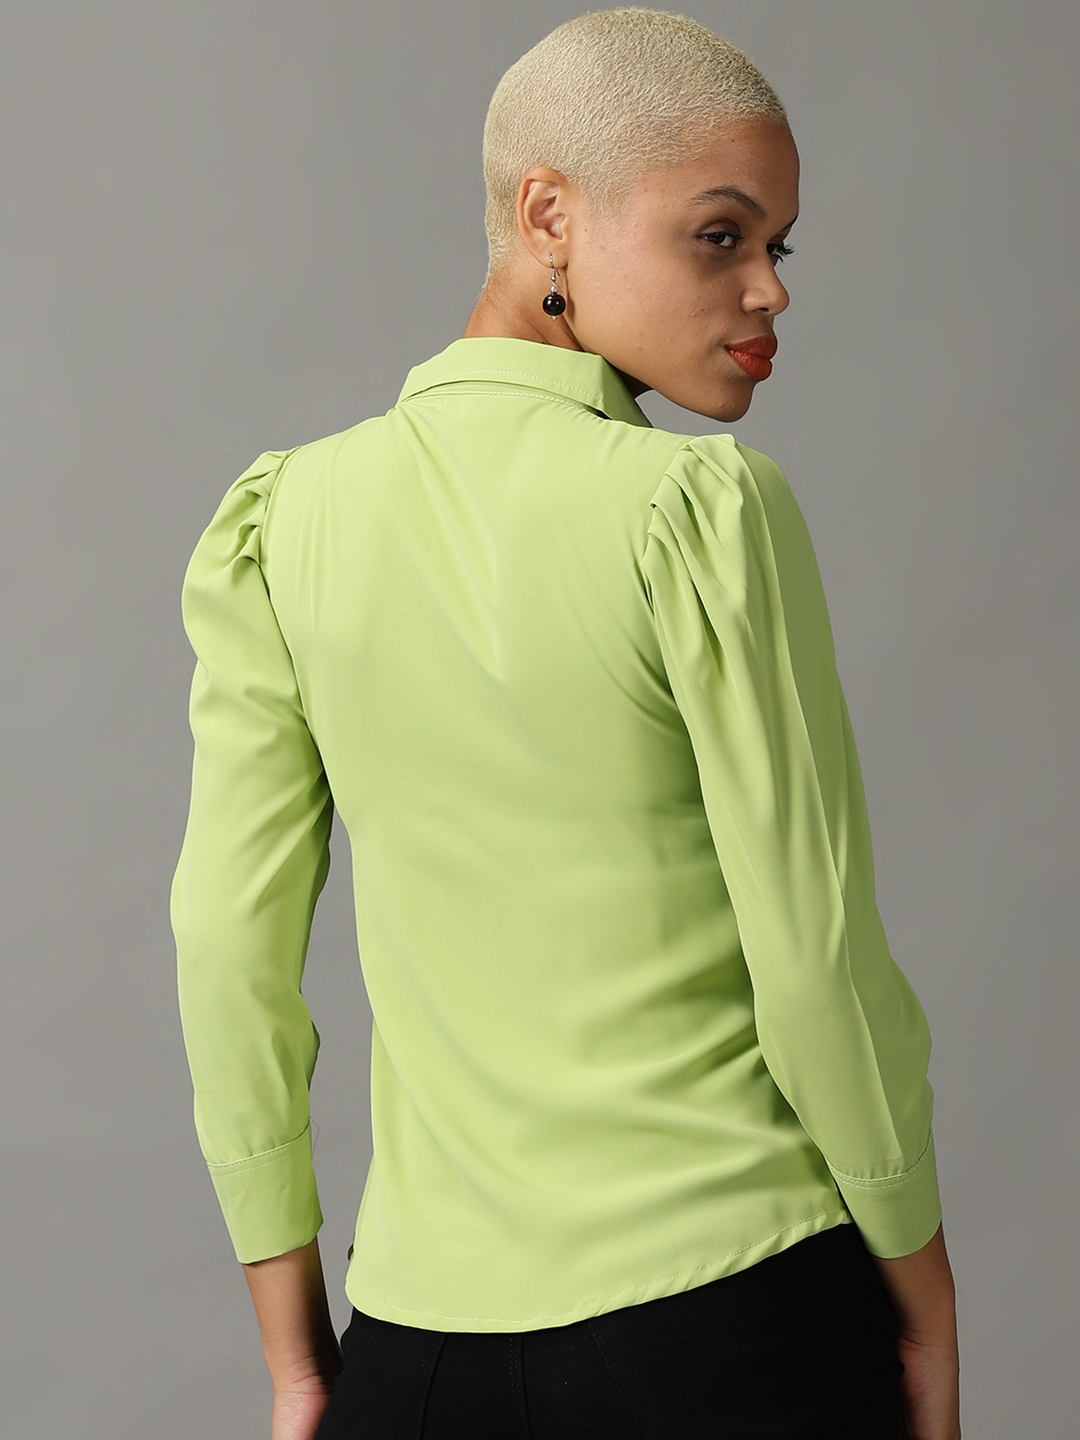 Women's Green Crepe Solid Casual Shirts